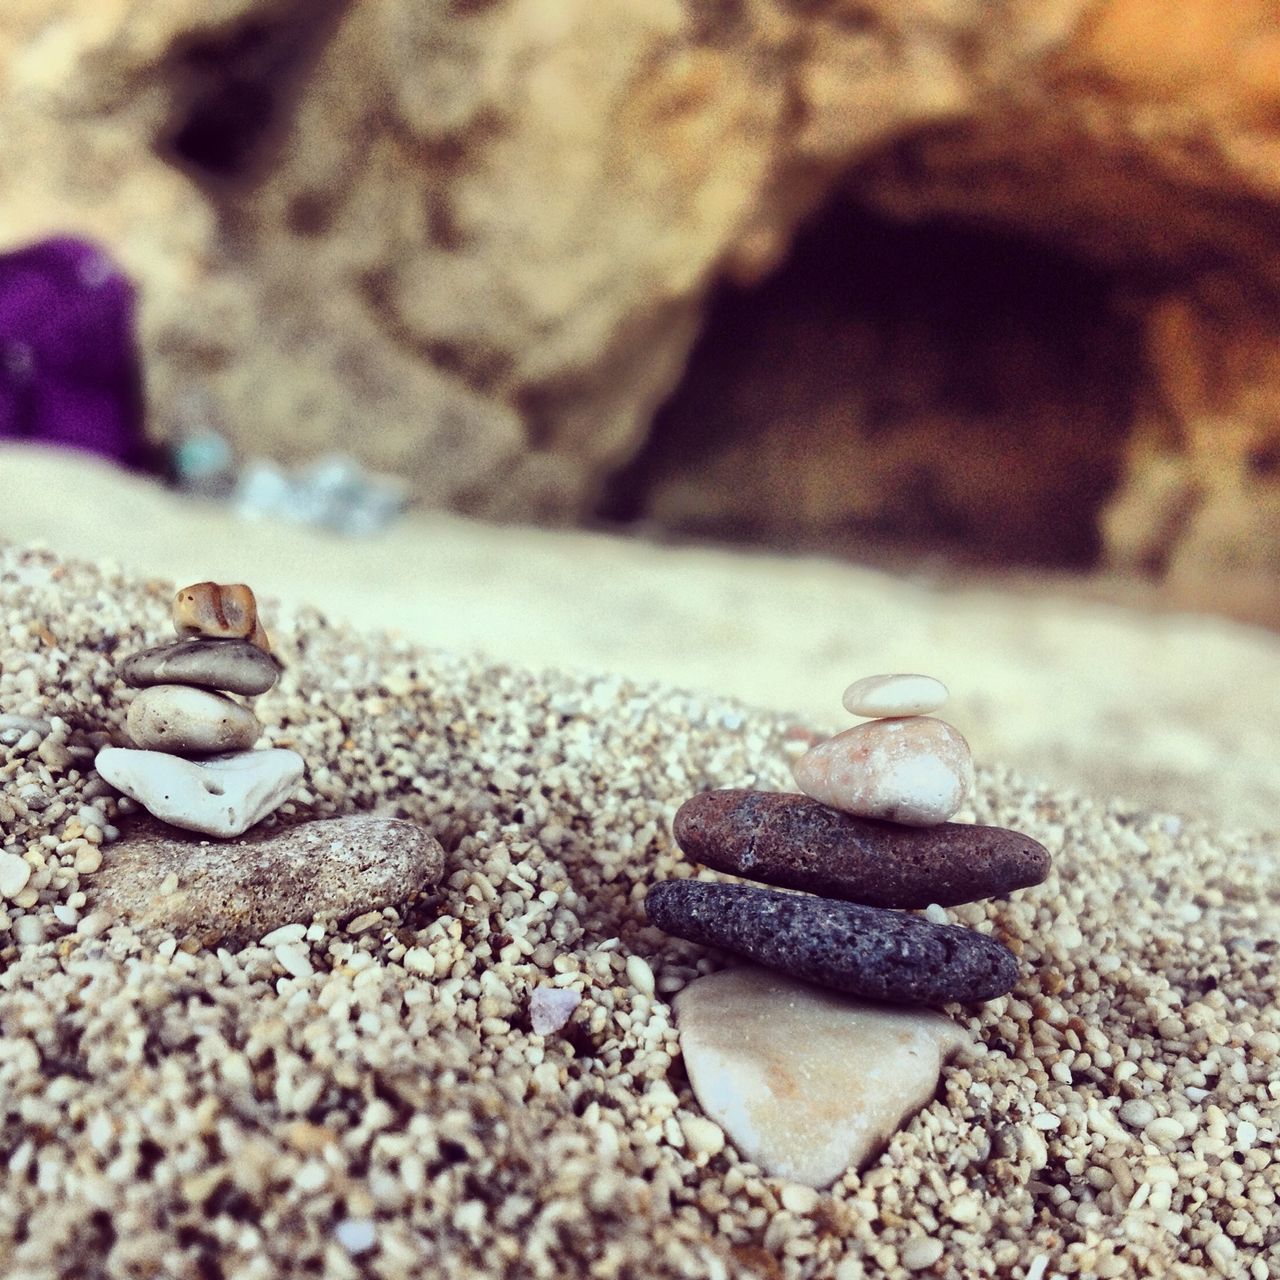 animal themes, animals in the wild, wildlife, one animal, selective focus, close-up, rock - object, sand, nature, beach, focus on foreground, insect, dead animal, surface level, rock, crab, day, outdoors, stone - object, no people